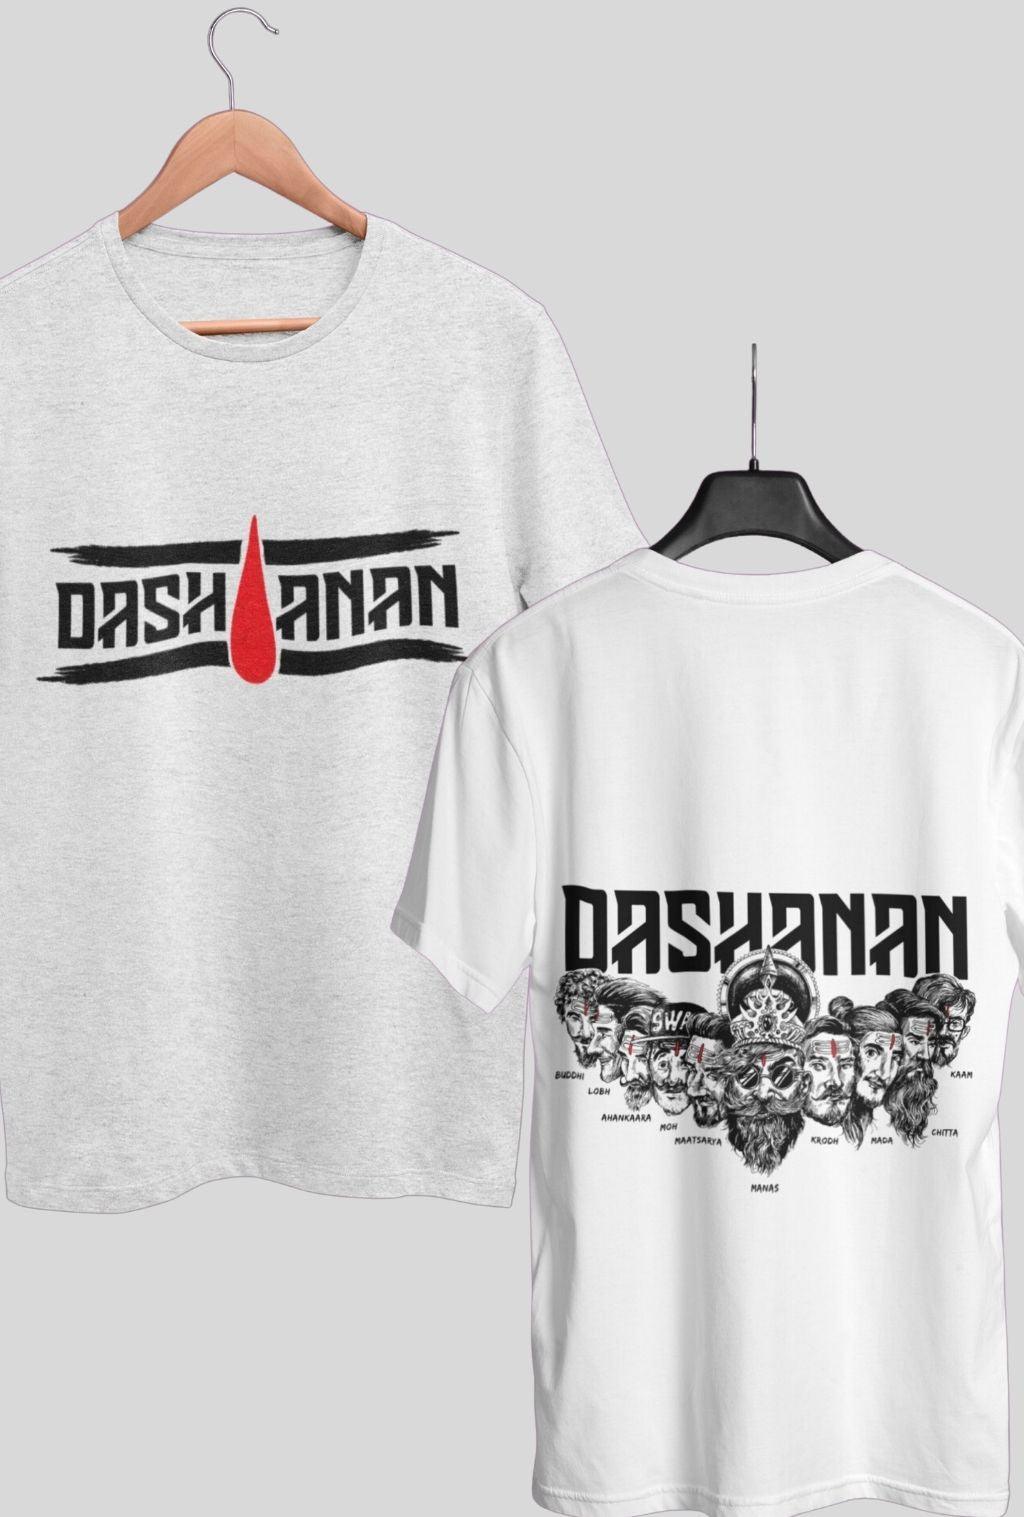 DASHANAN | Funky Fusion | Boys Quirky Vibe - Quirky Vibe India